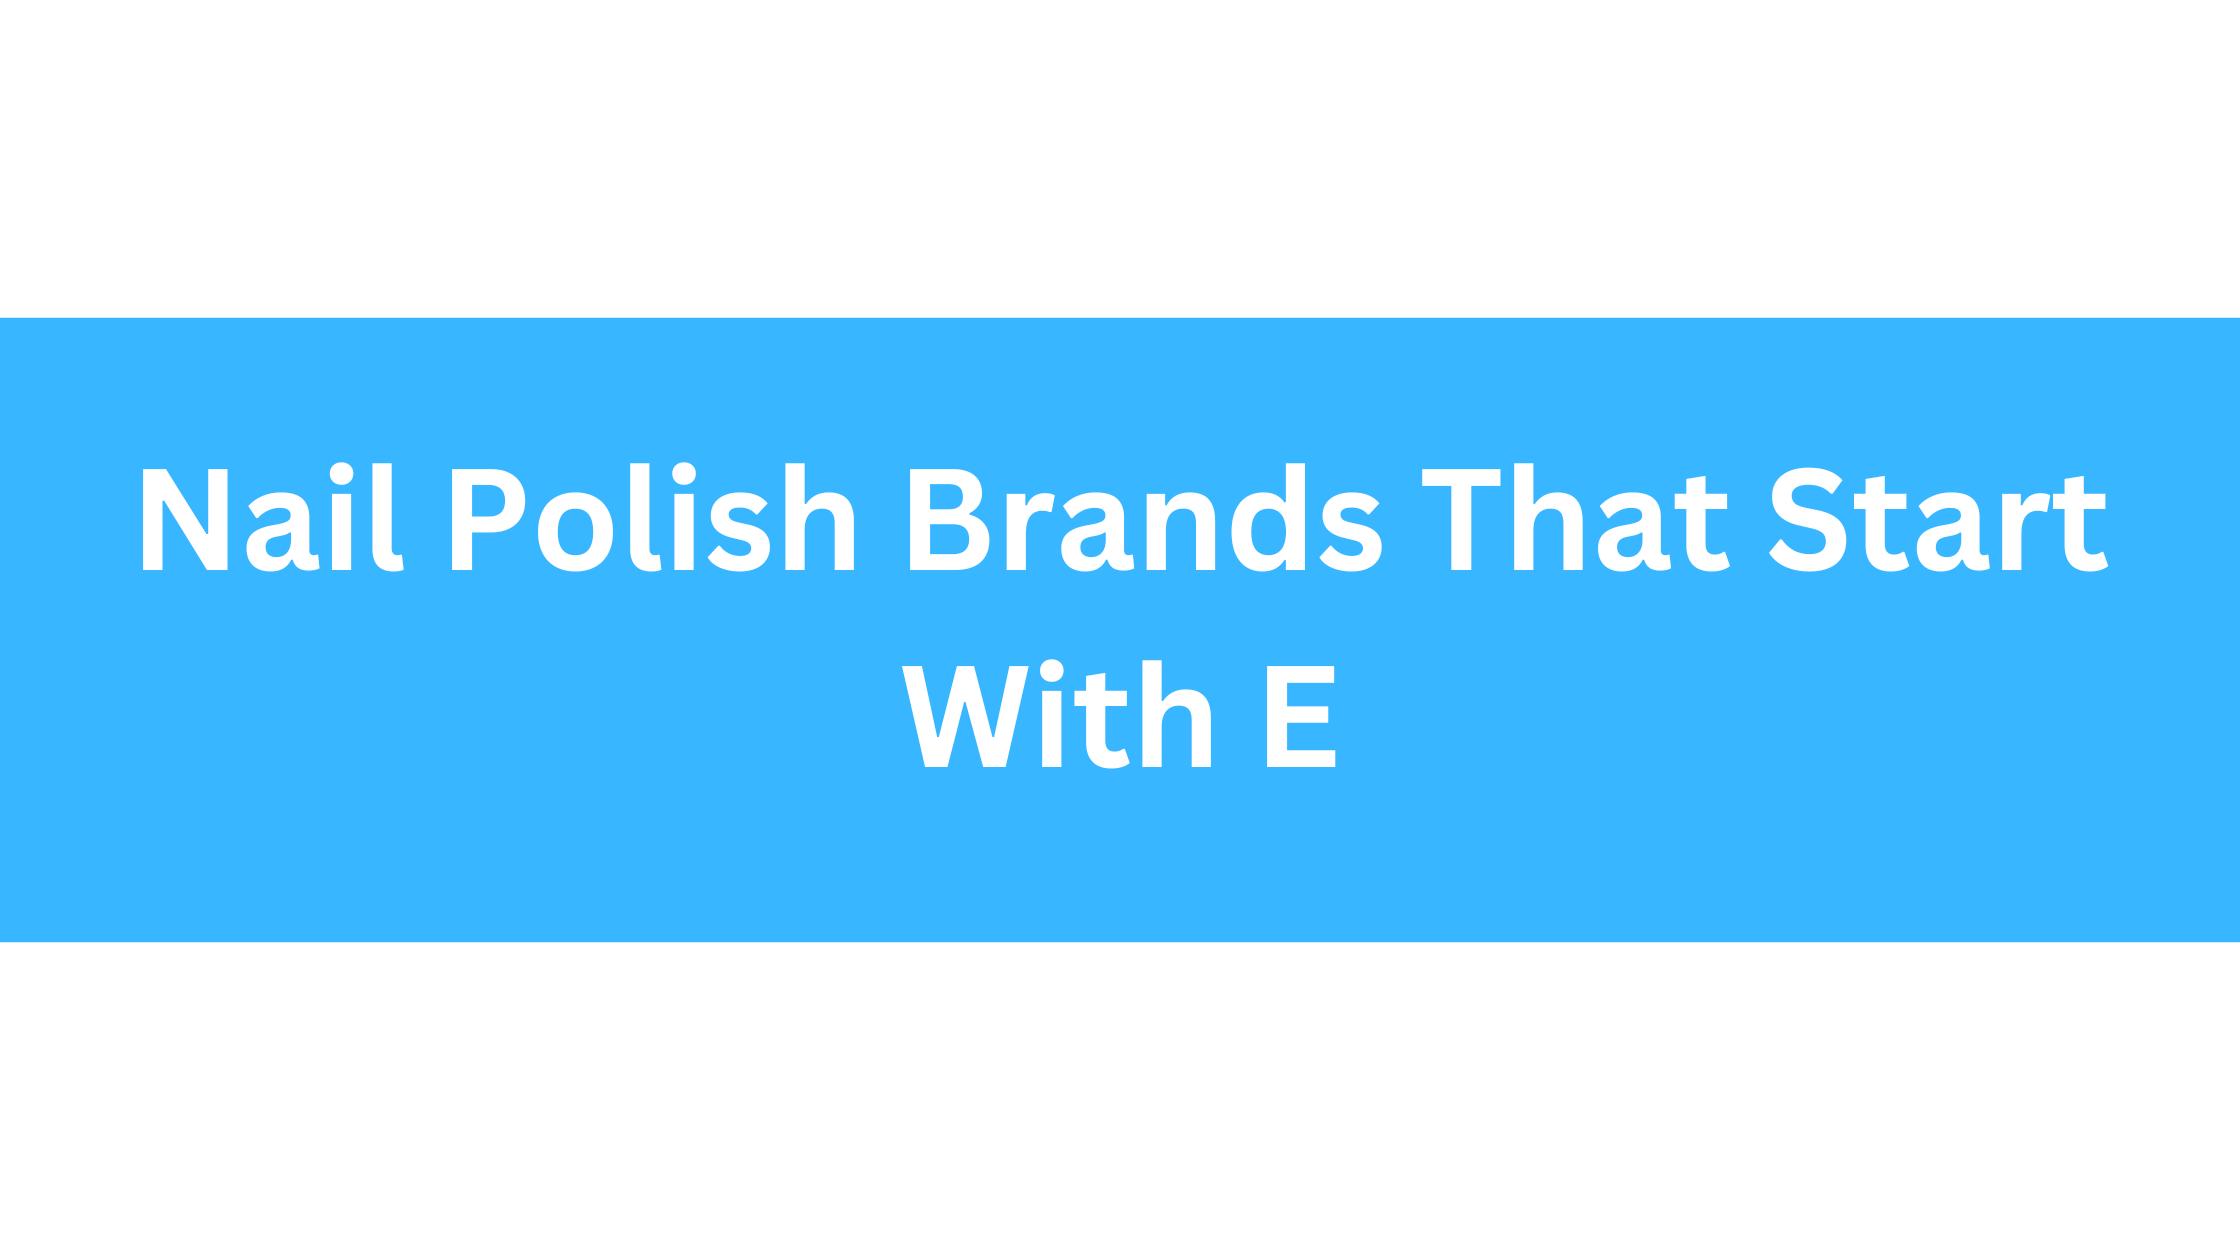 Nail Polish Brands That Start With E